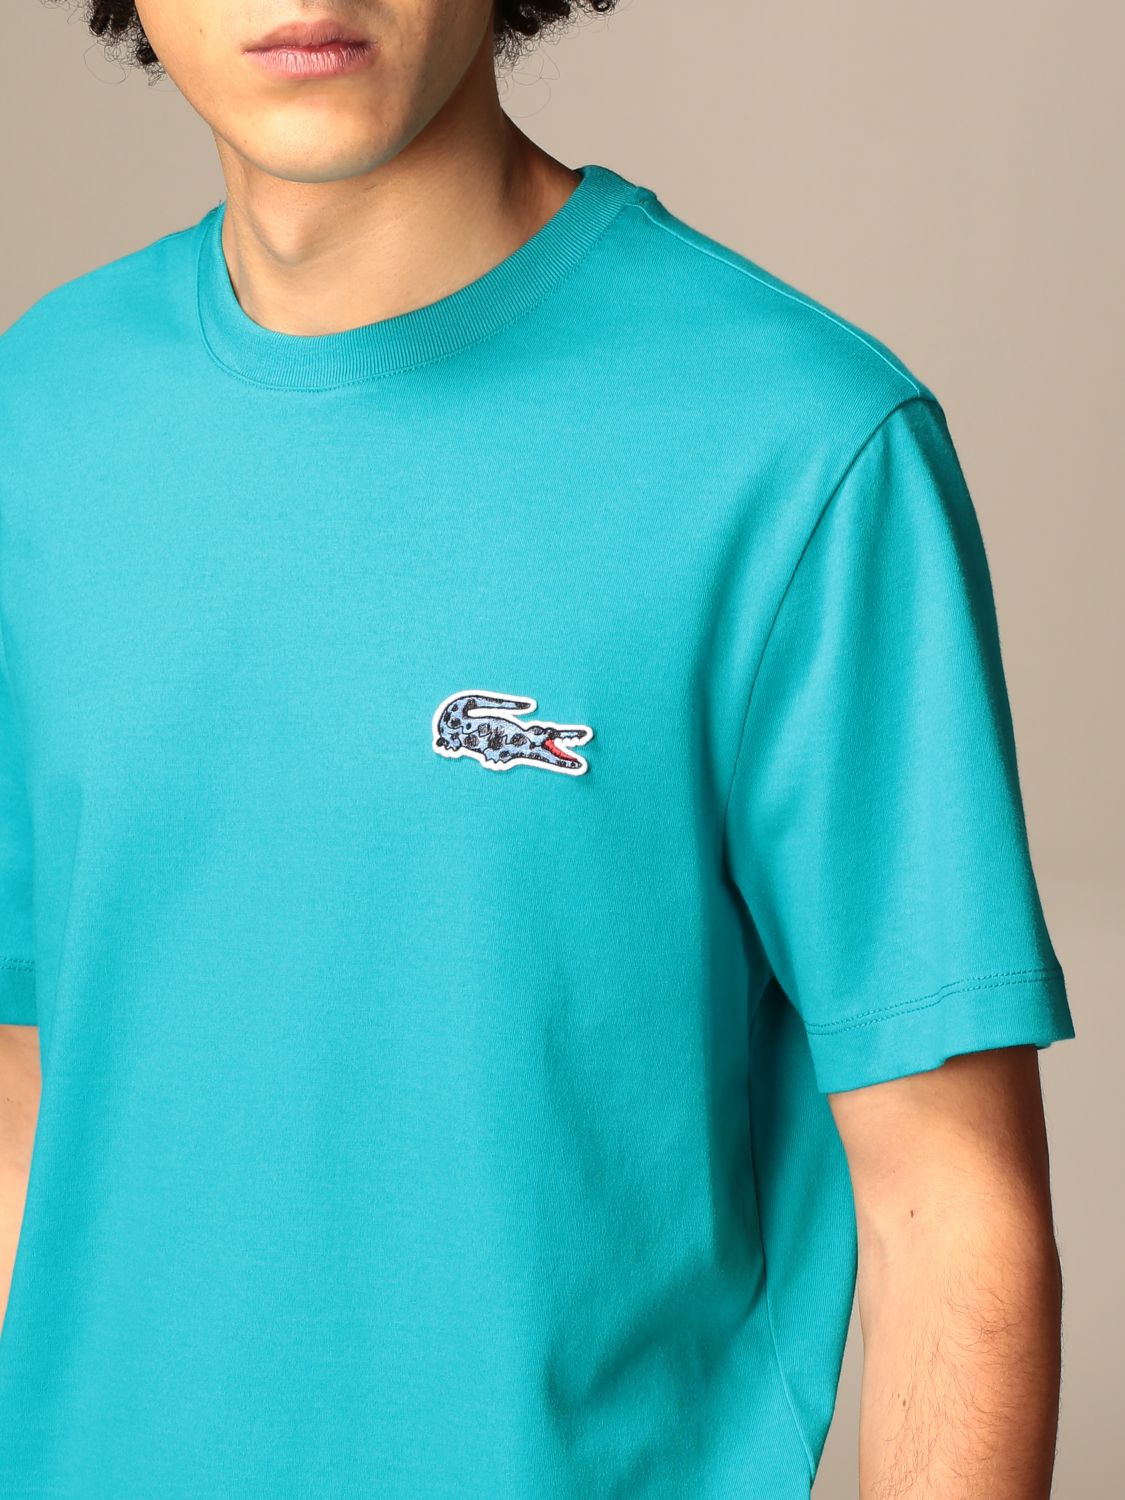 lacoste teal t shirt